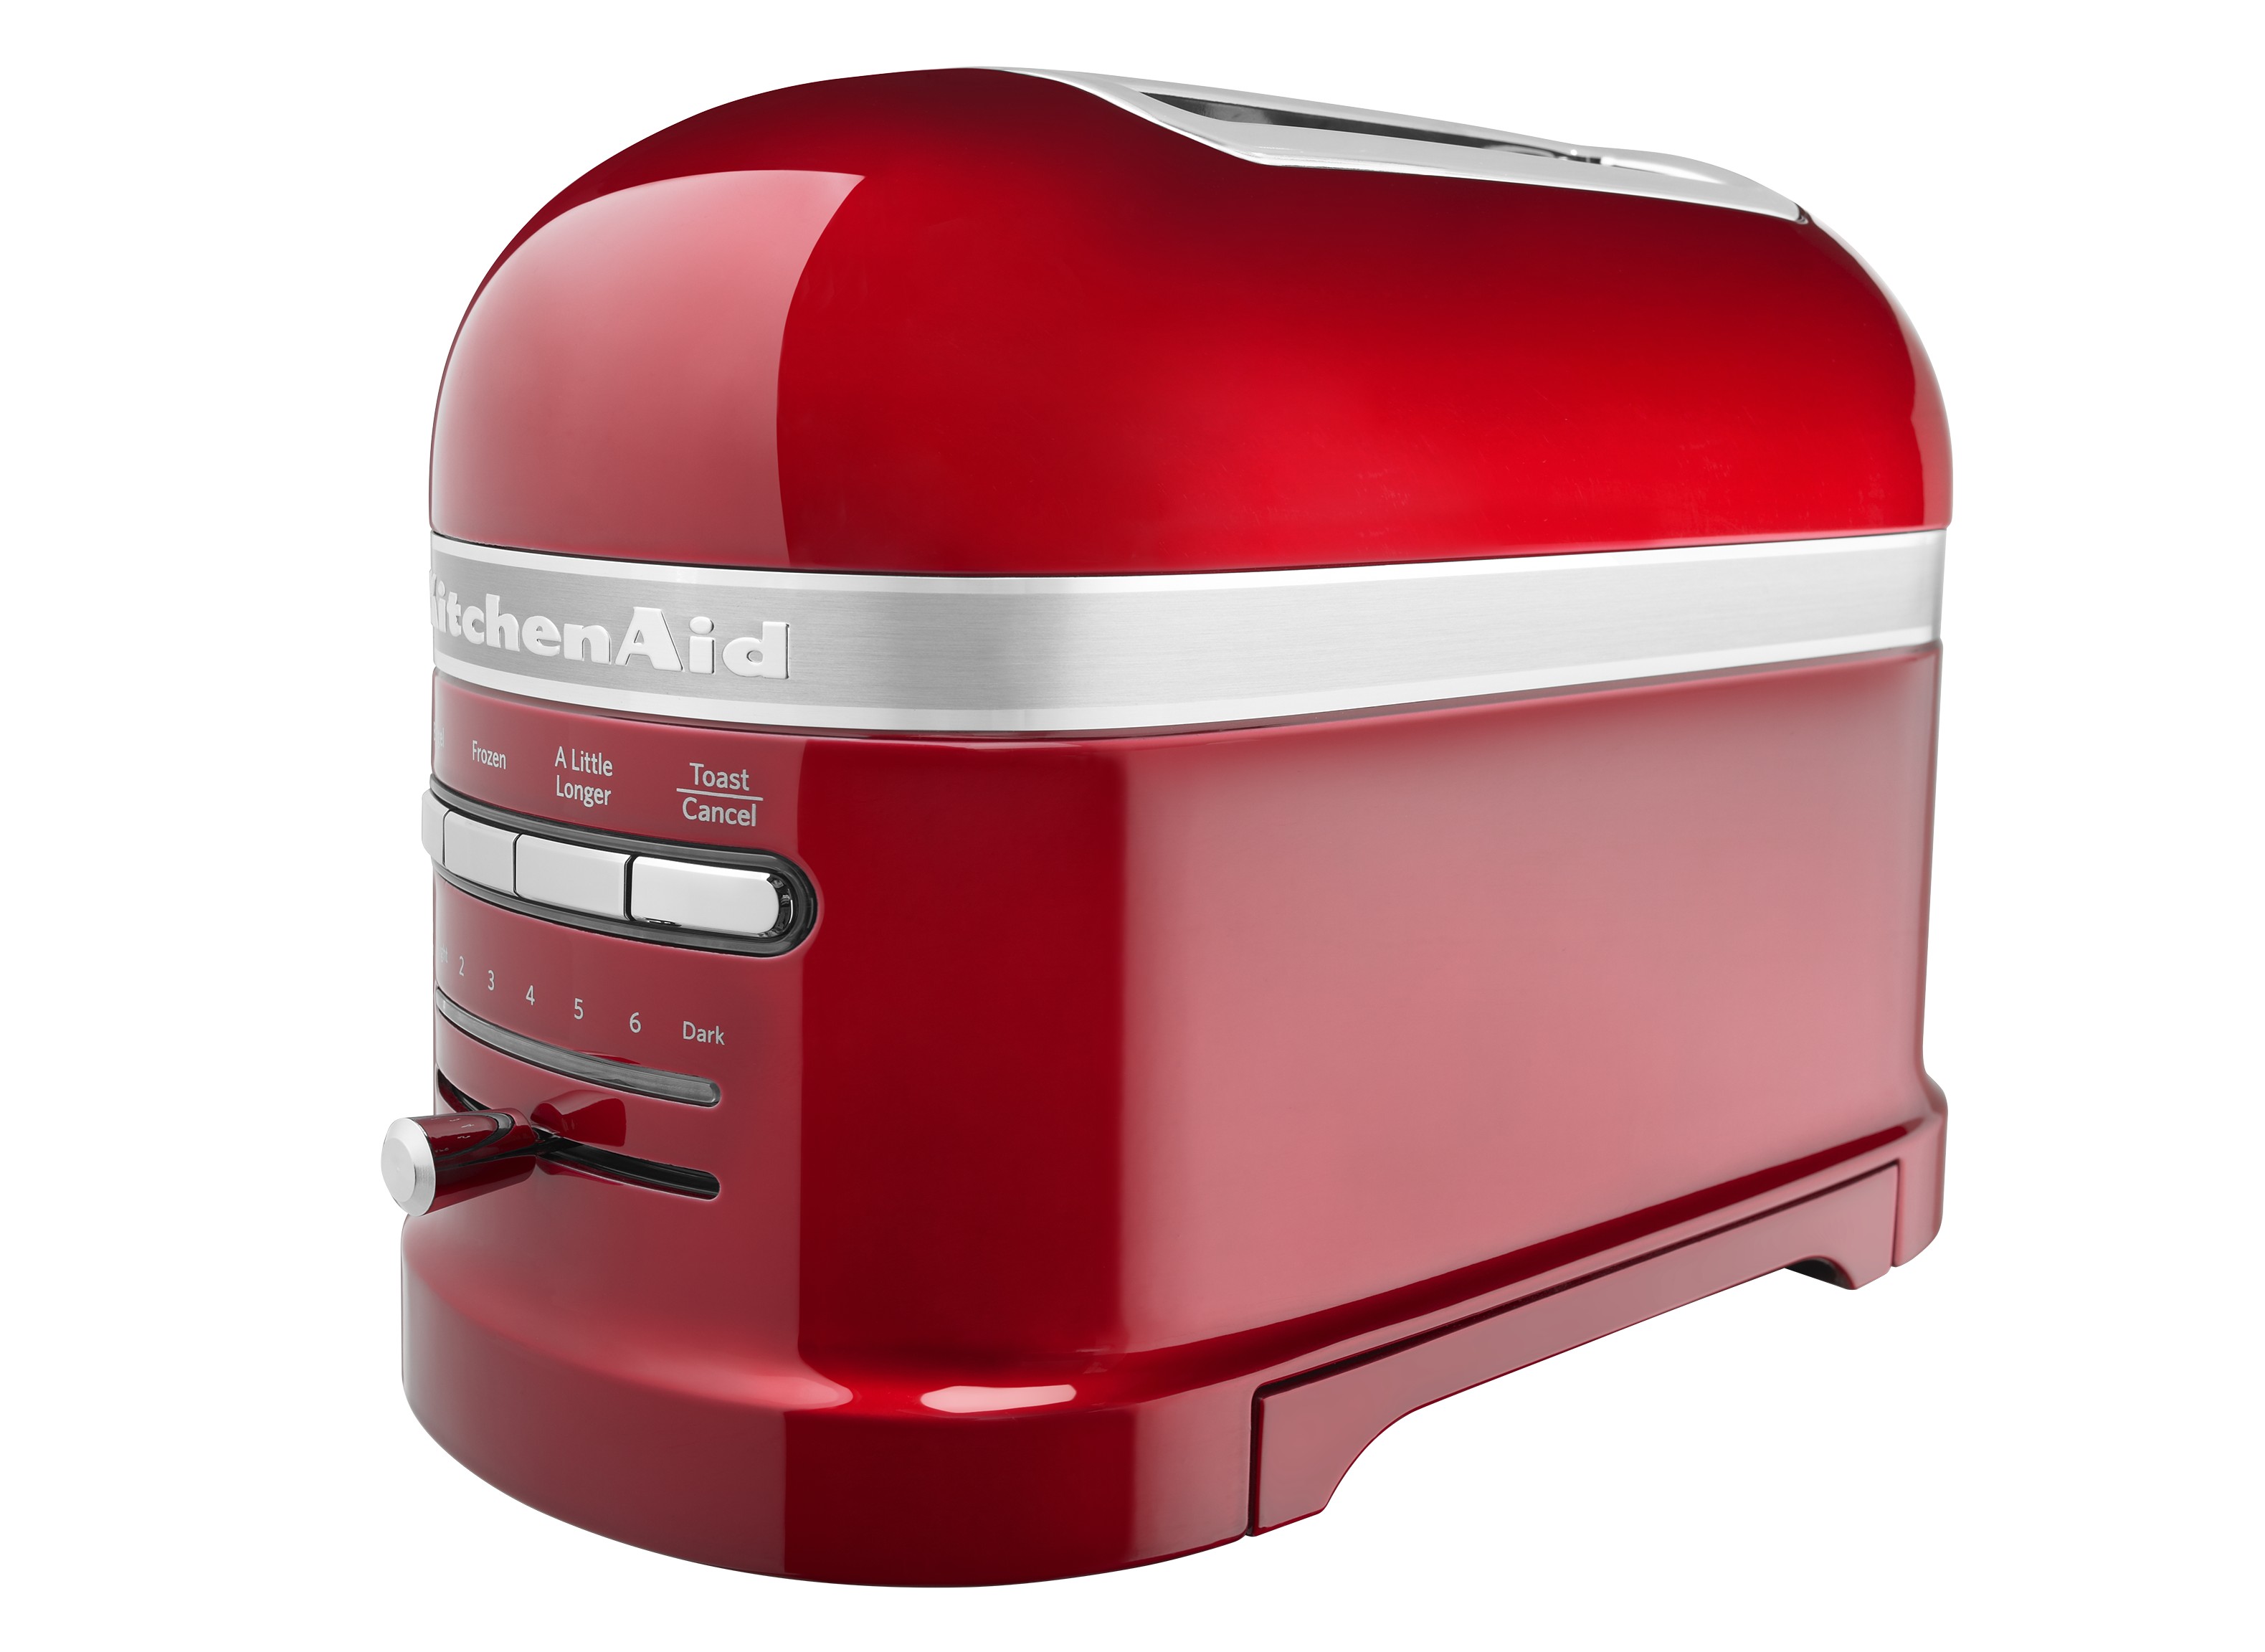 https://crdms.images.consumerreports.org/prod/products/cr/models/220310-toasters-kitchenaid-prolinekmt2203ca.jpg